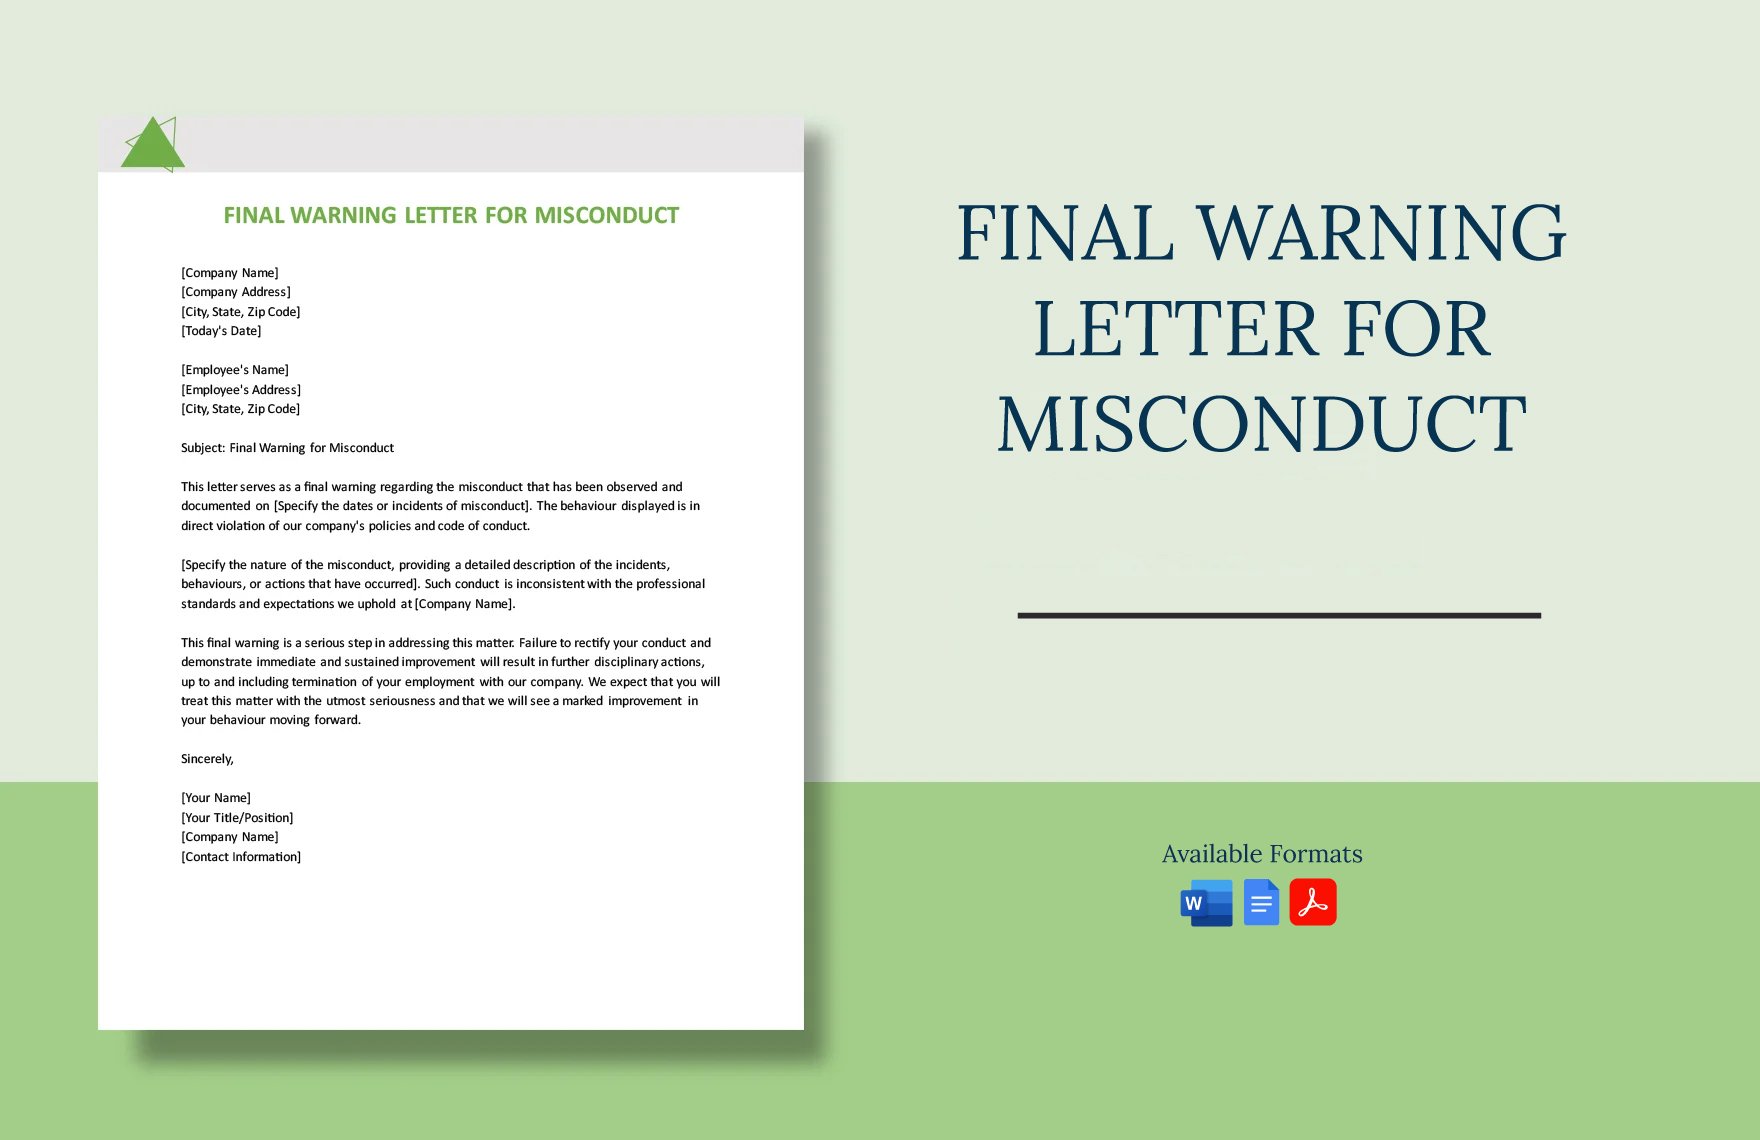 Final Warning Letter For Misconduct in Word, Google Docs, PDF